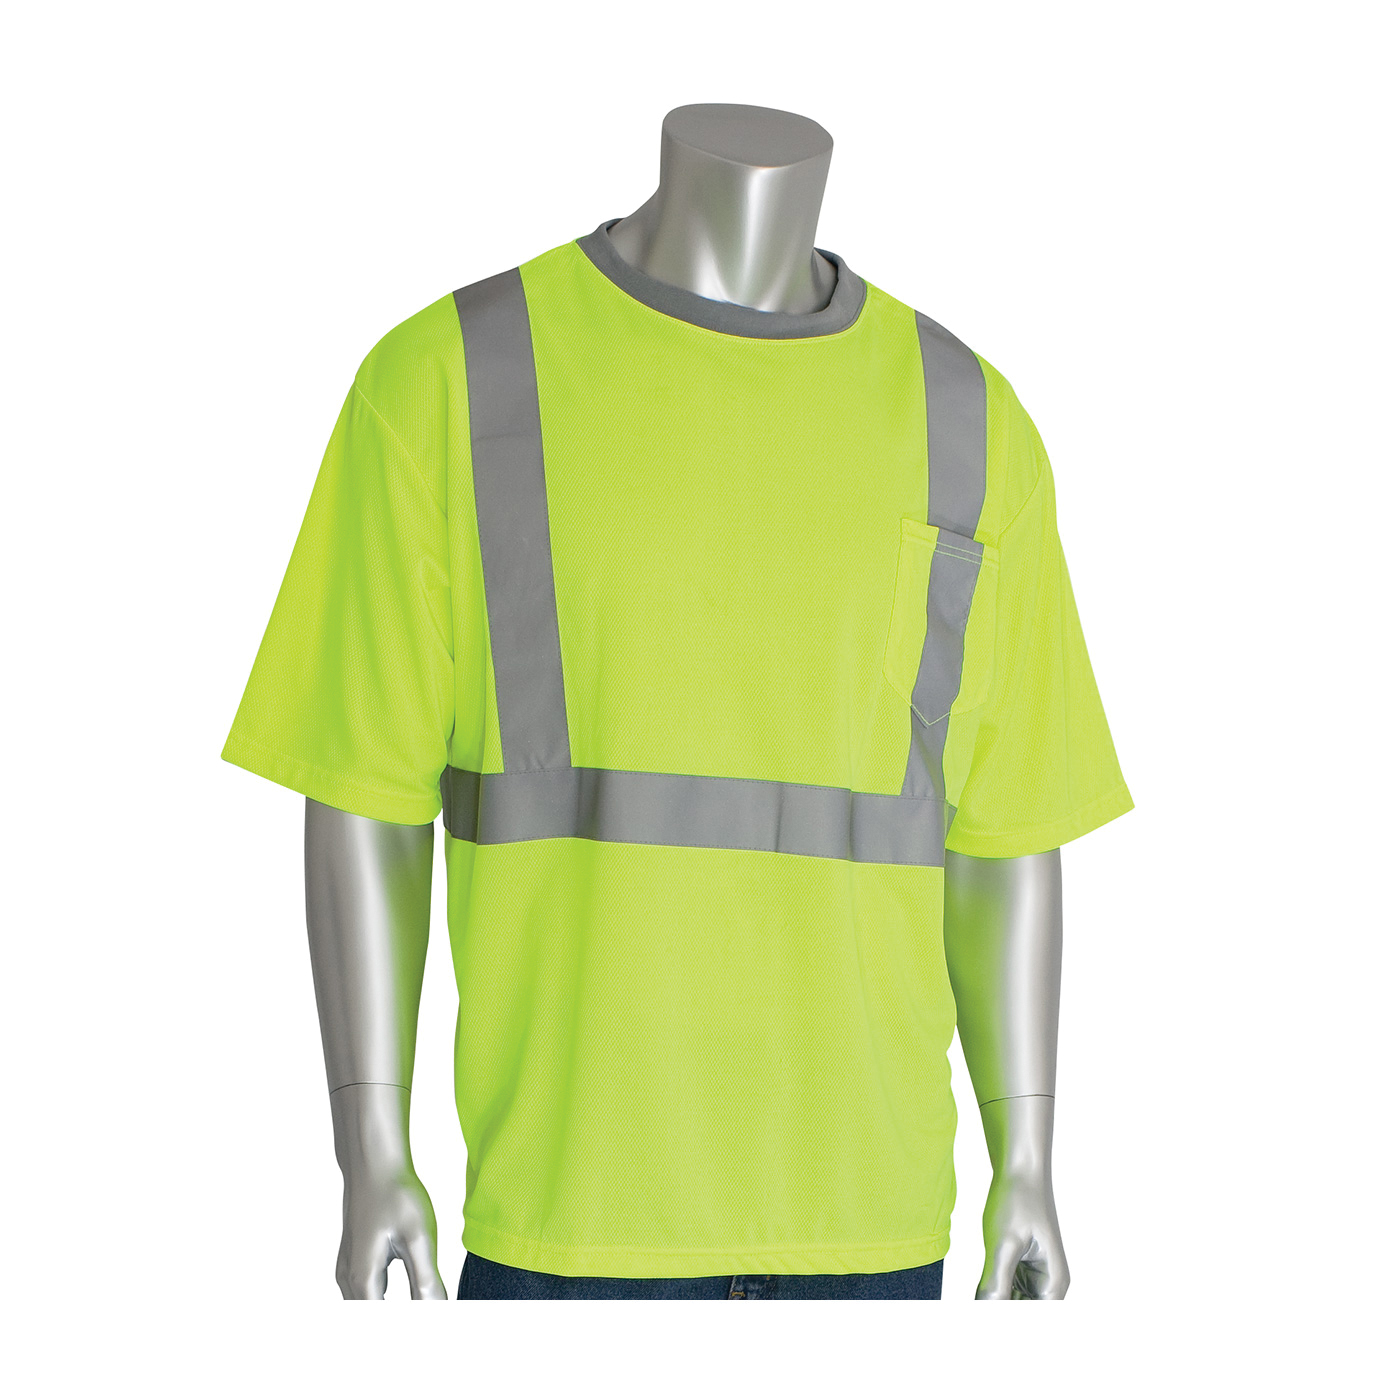 PIP® 312-1200-LY/2X Short Sleeve Crew Neck T-Shirt With Reflective, 2XL, Hi-Viz Lime Yellow, Bird's Eye Polyester, 32.7 in L